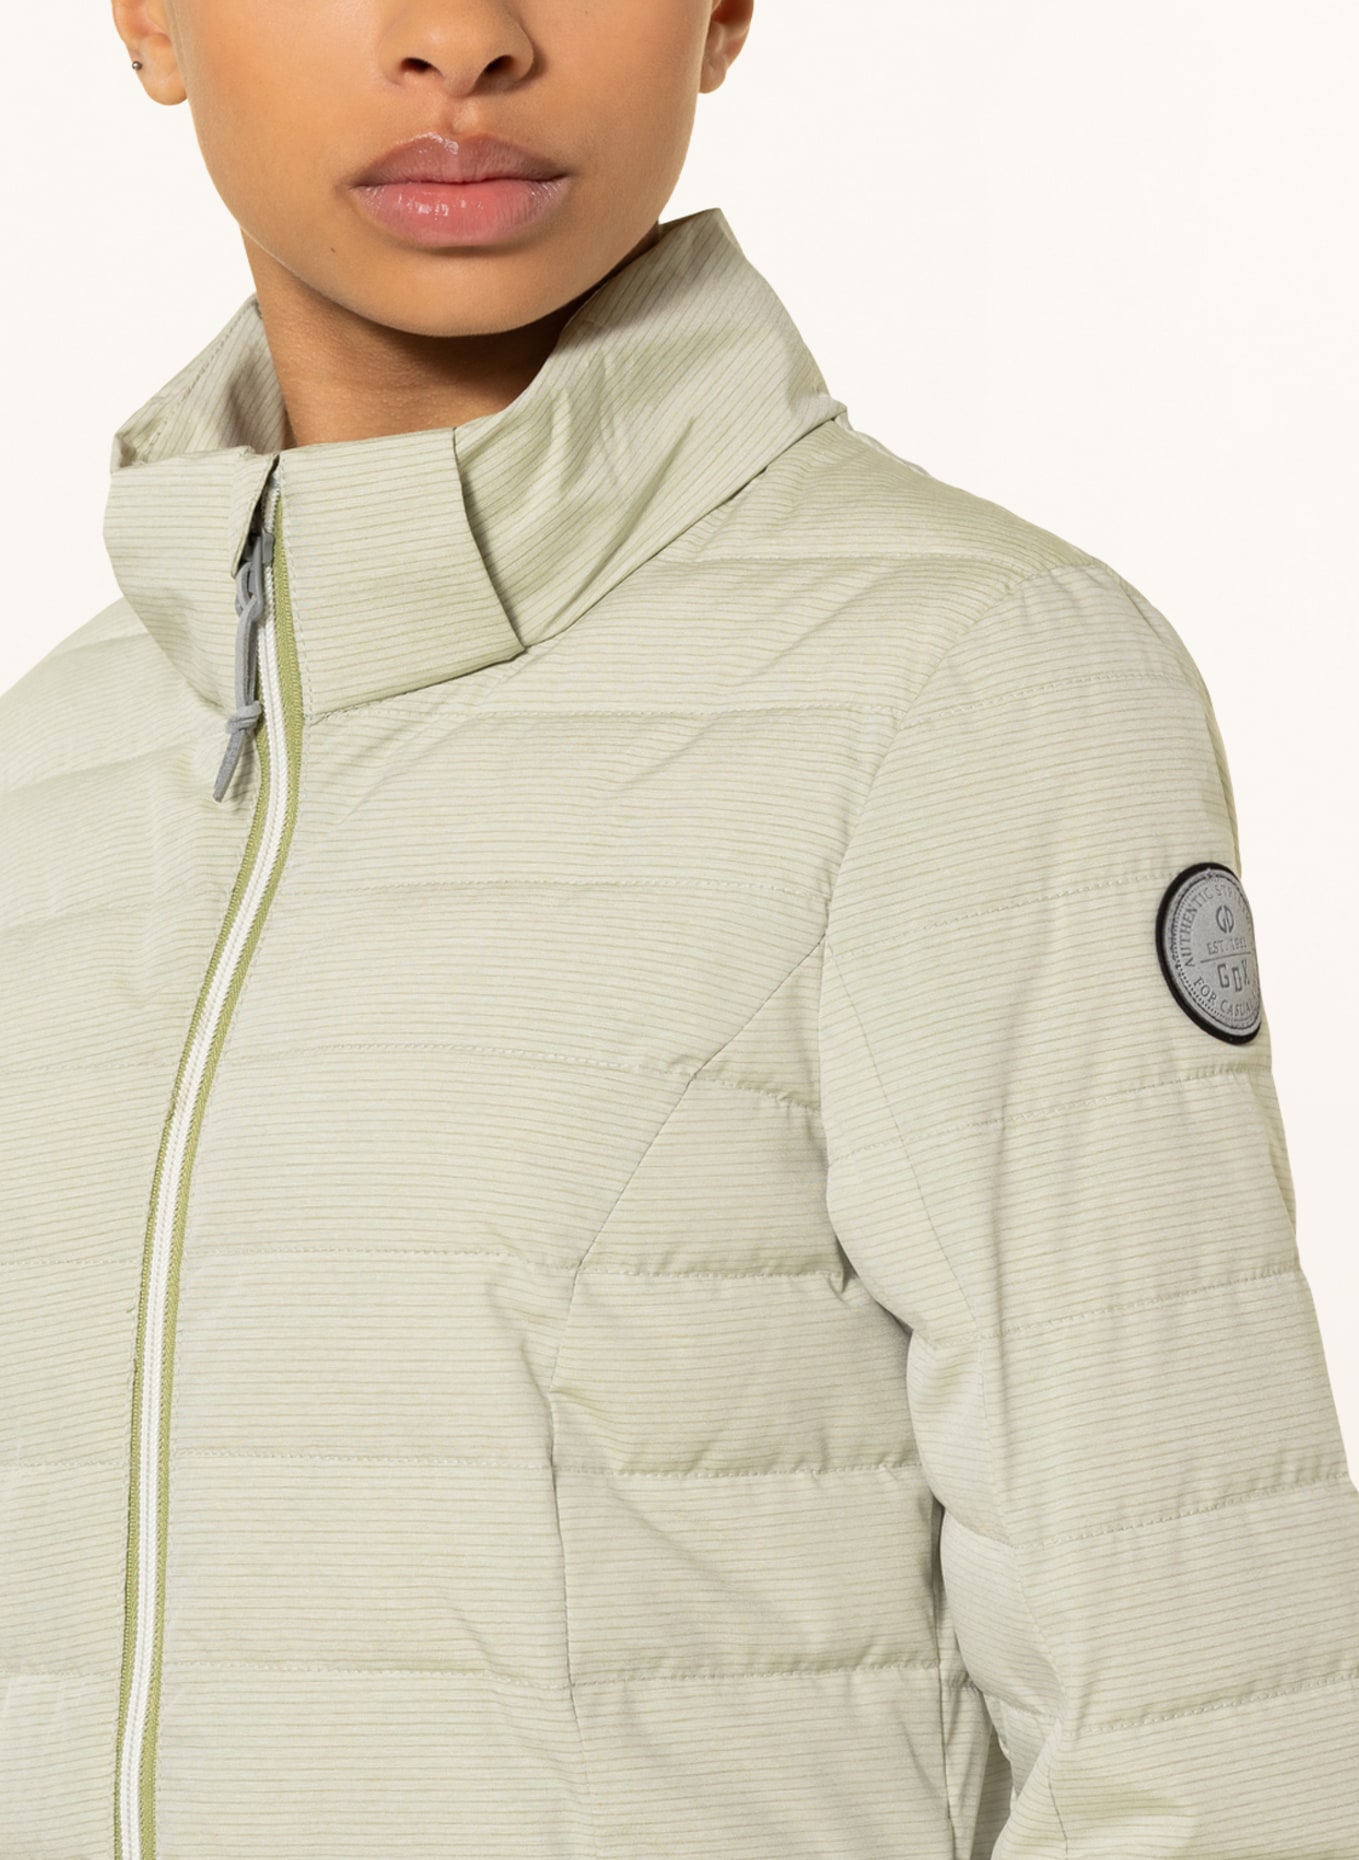 G.I.G.A. DX Quilted killtec jacket light by UYAKA green in